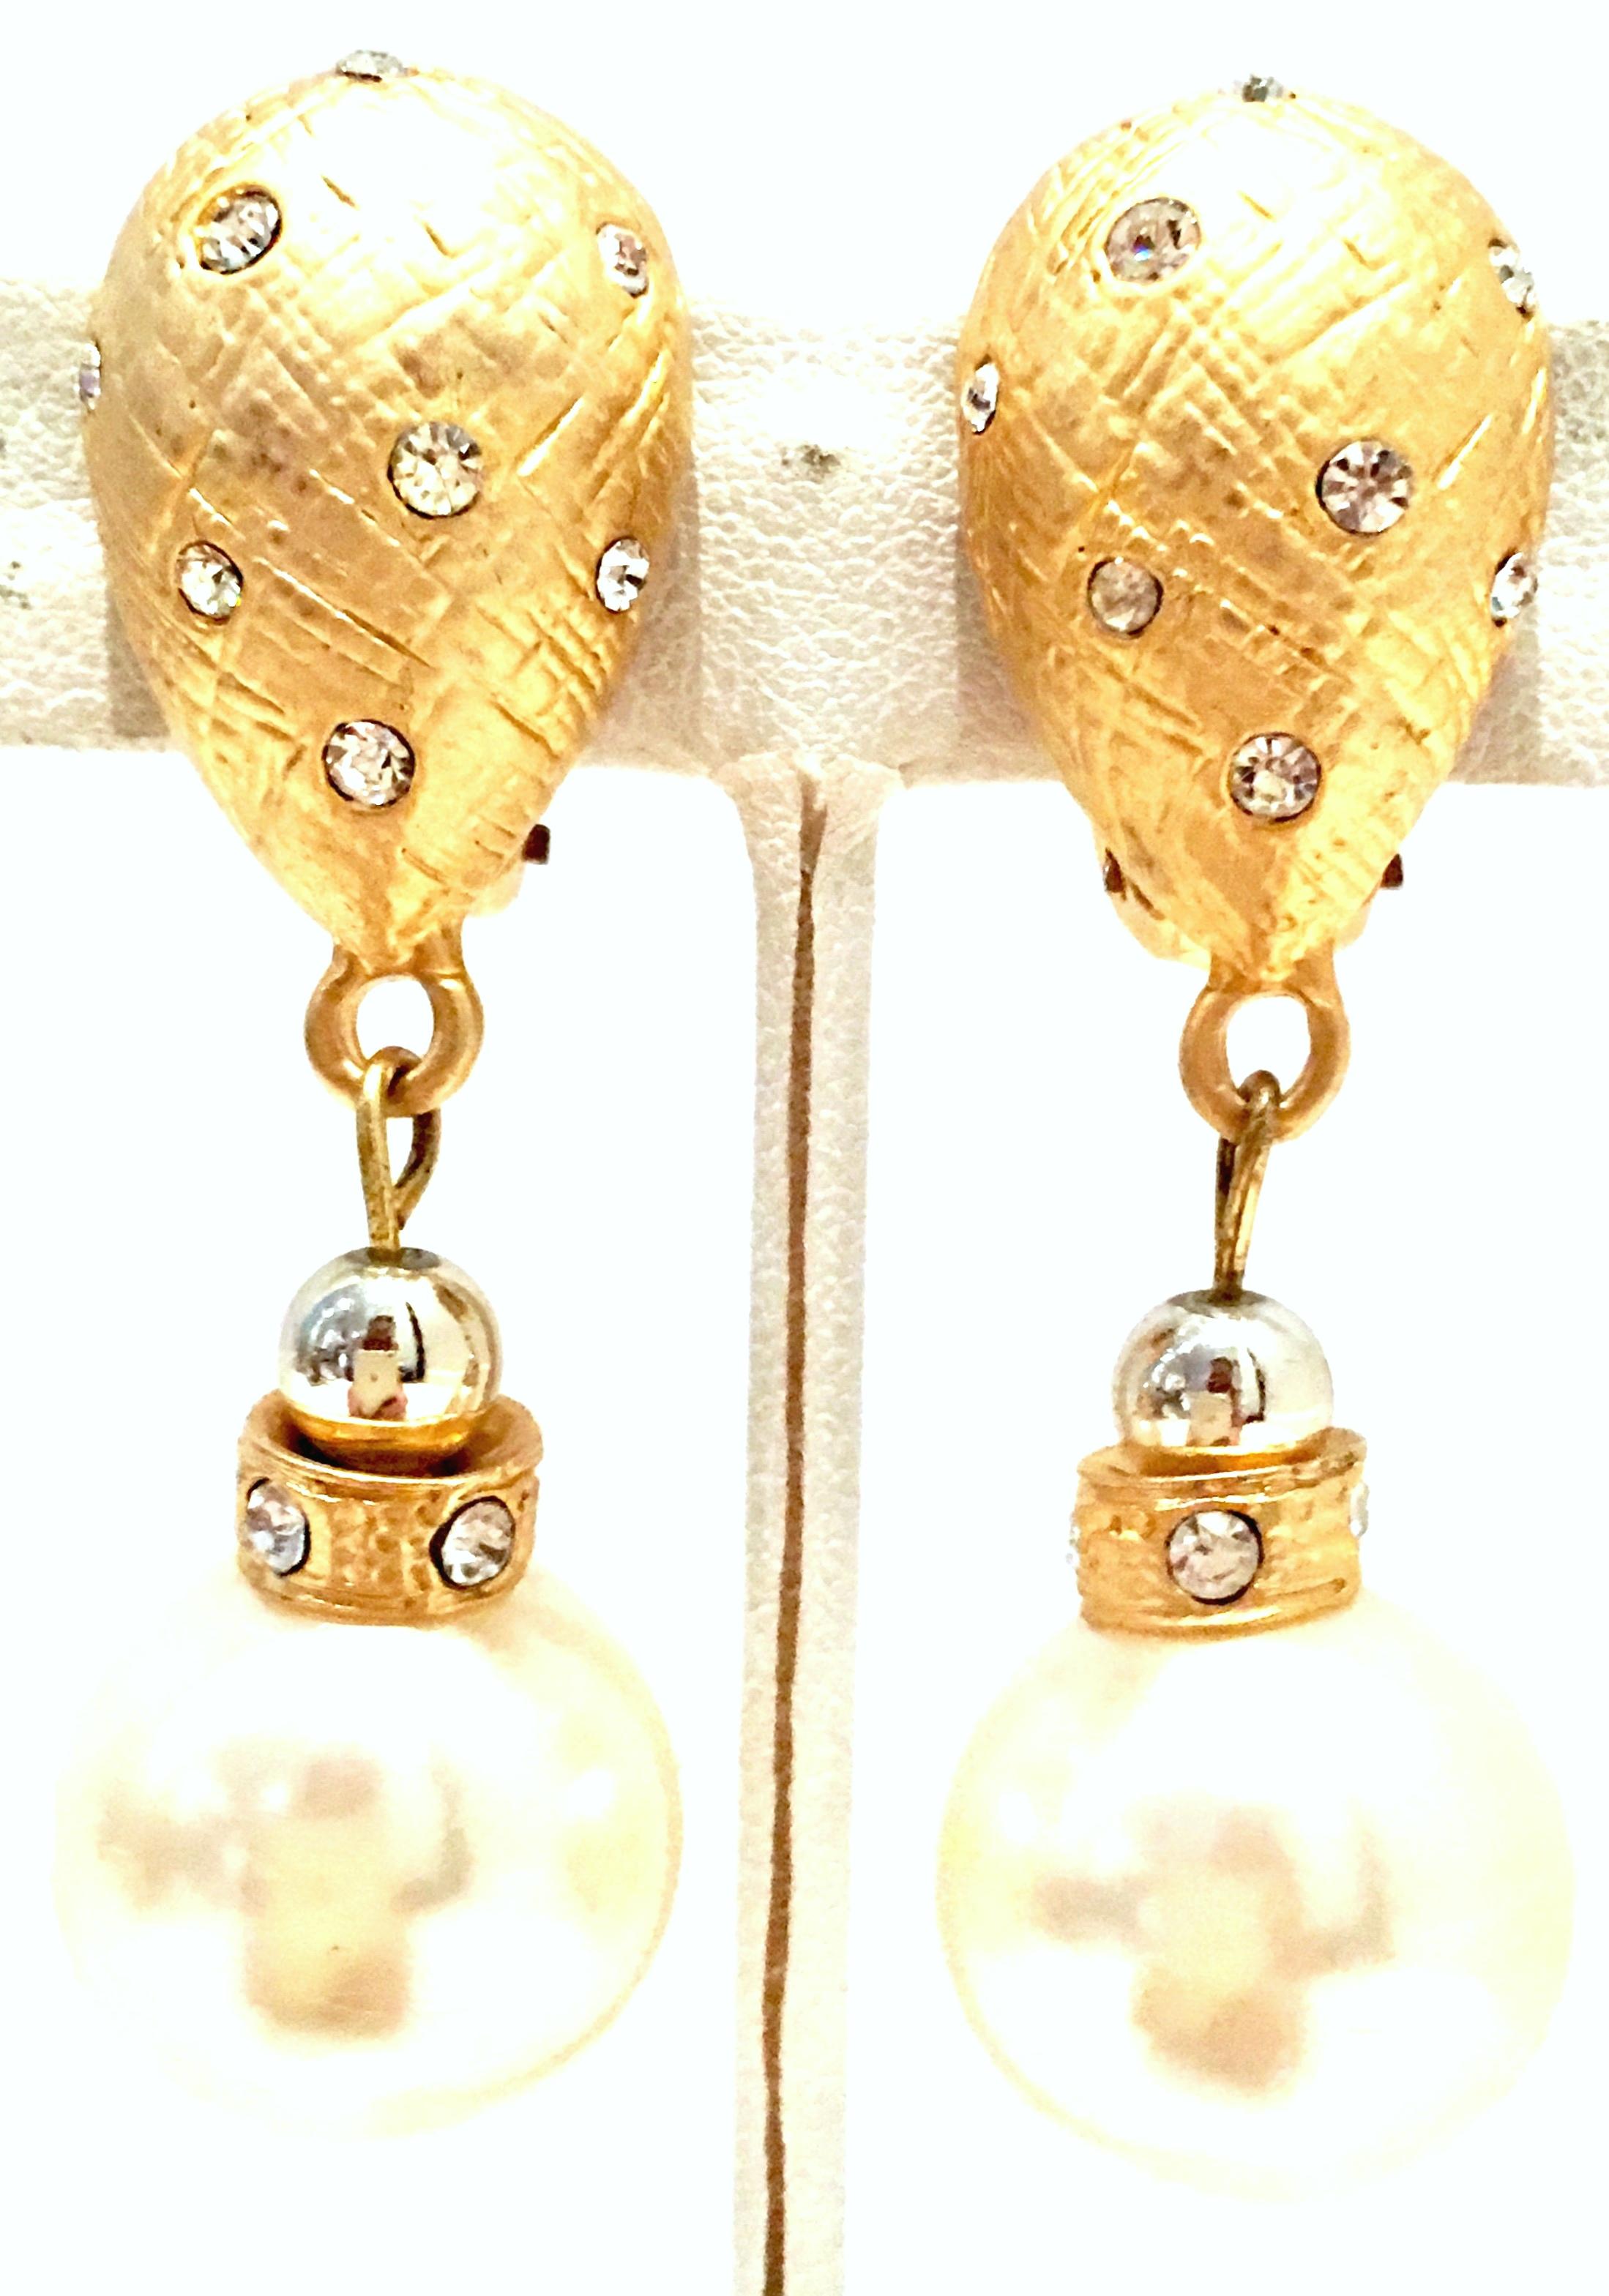 1980'S Brushed Gold Plate, Chrome, Faux Pearl Bead & Swarovski Crystal Rhinestone Drop Earrings By, Christian Dior. Originally part of a set where the necklace was signed the earrings are not signed.